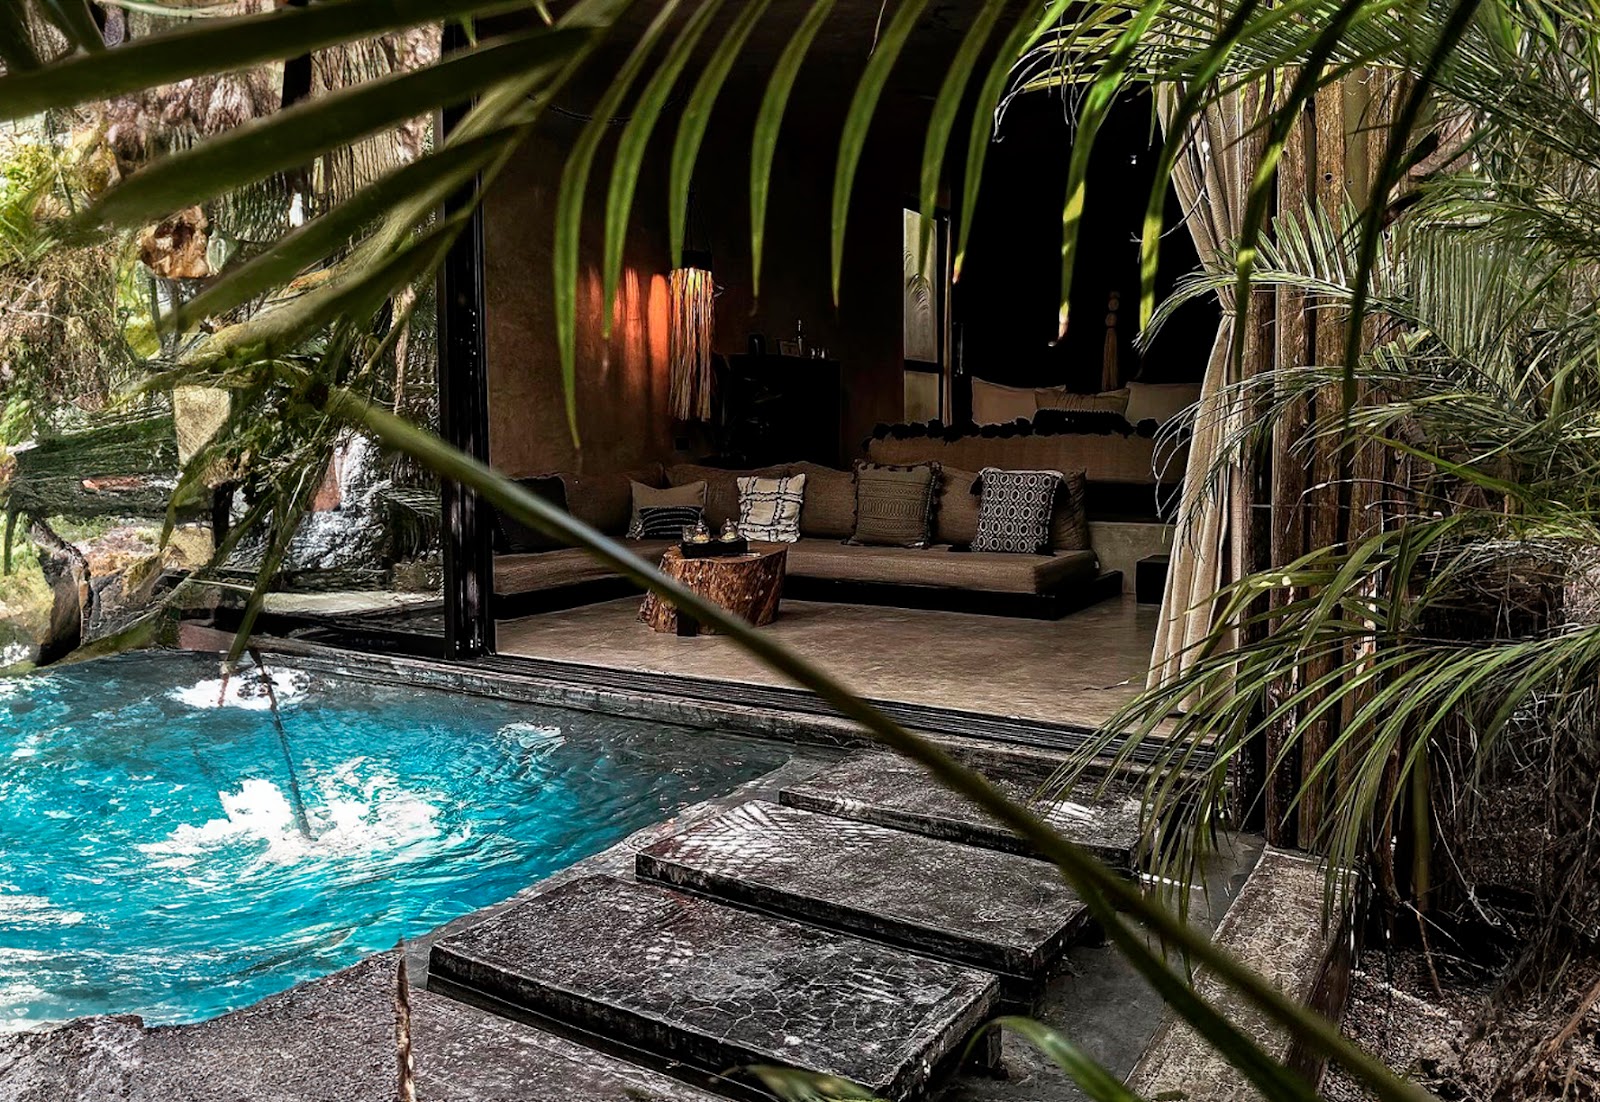 Of Transition, Rebirth and Self Discovery: Why Bardo Group Embodies The Very Best of Tulum